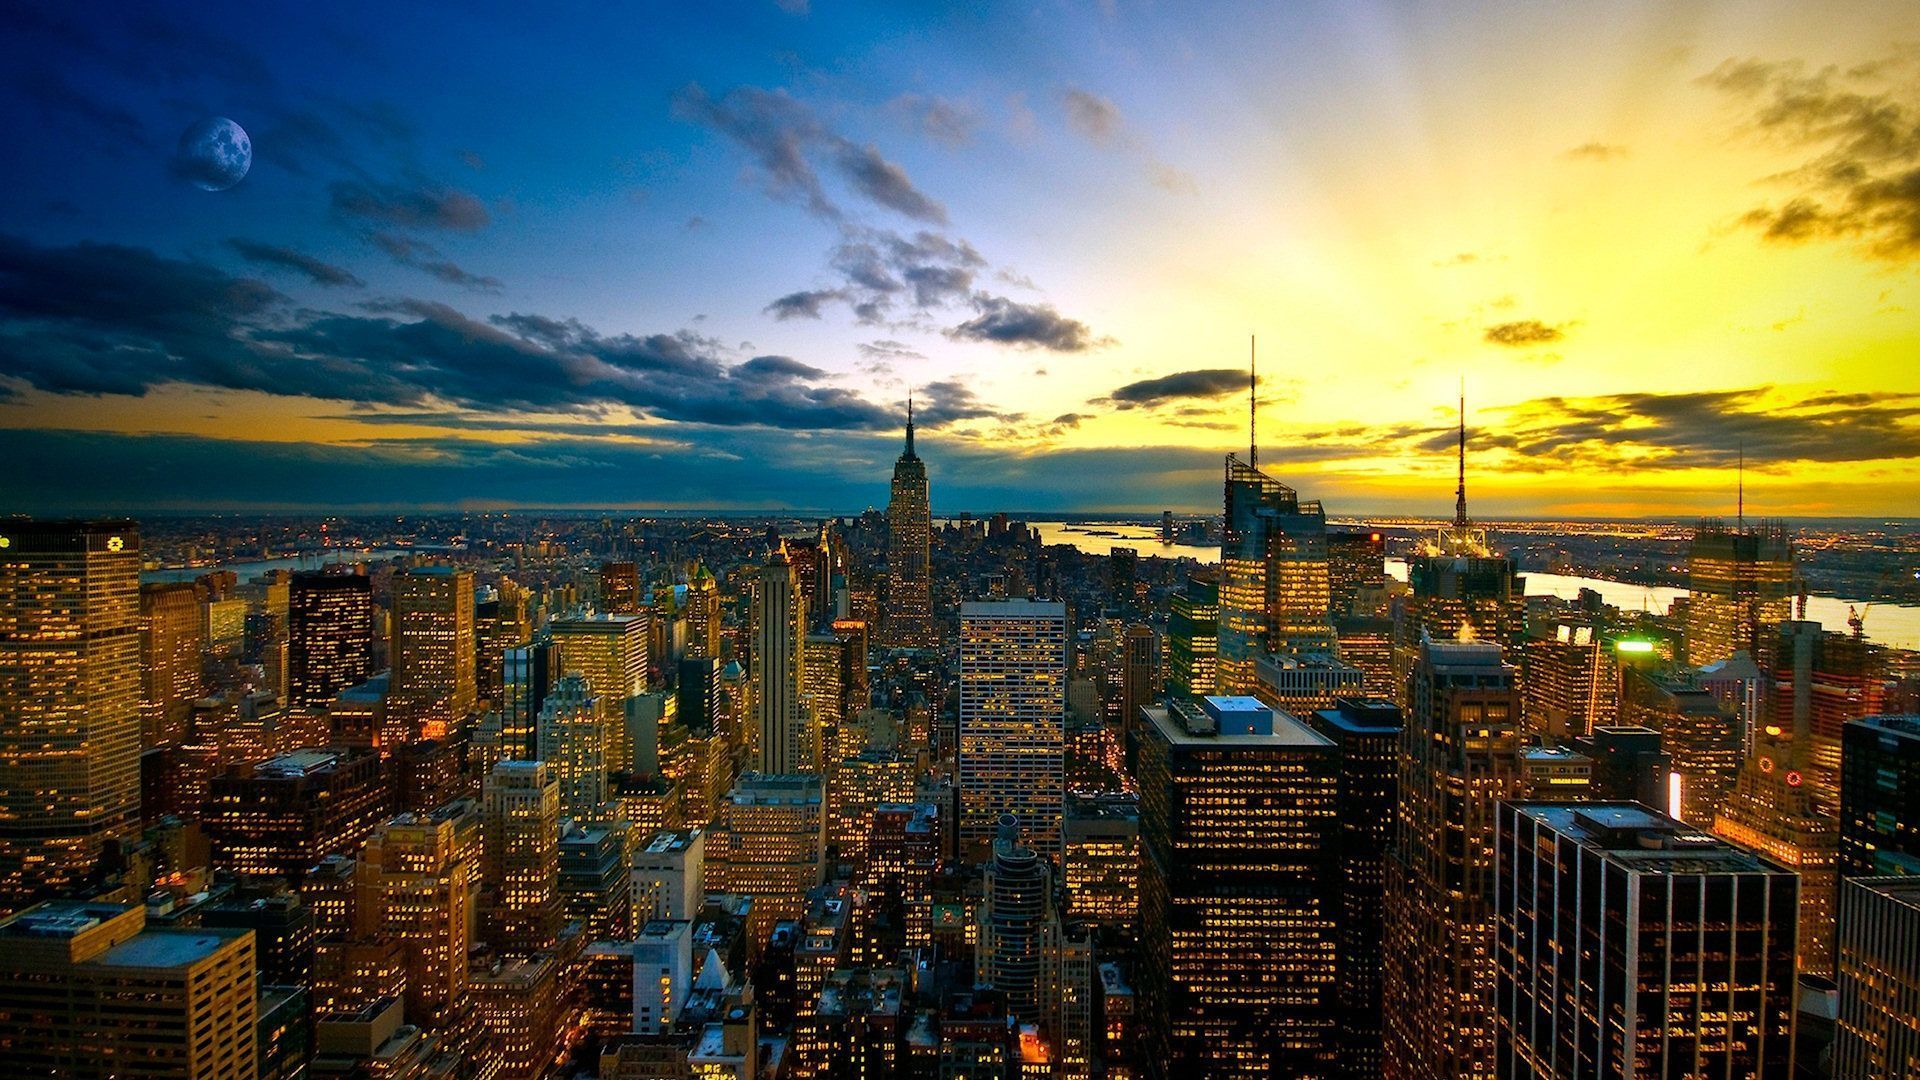 Cityscape #509234 | Full HD Widescreen wallpapers for desktop download